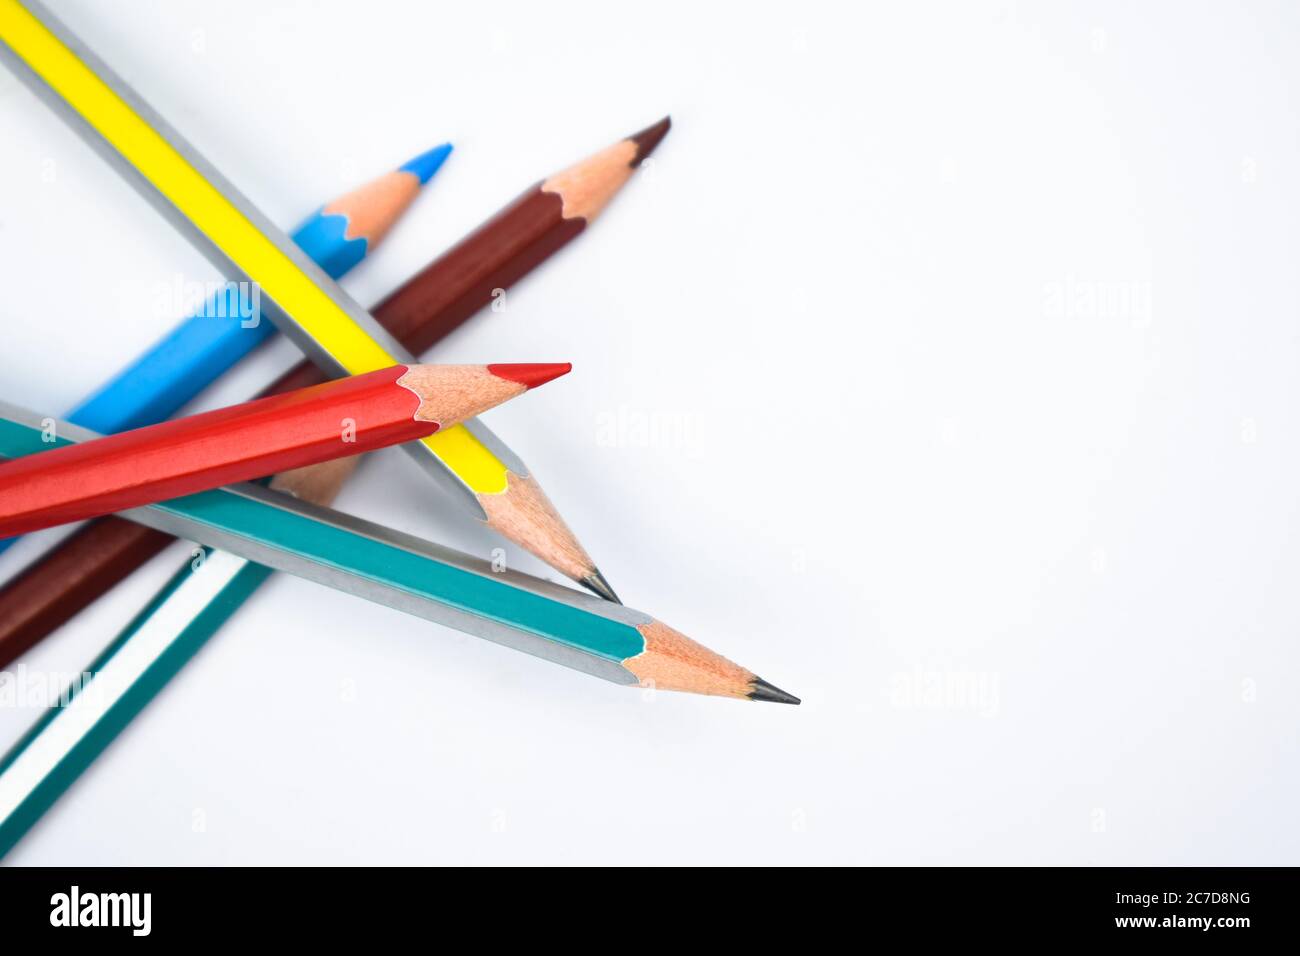 Some different colored wood pencil crayon scattered on a white paper background Stock Photo